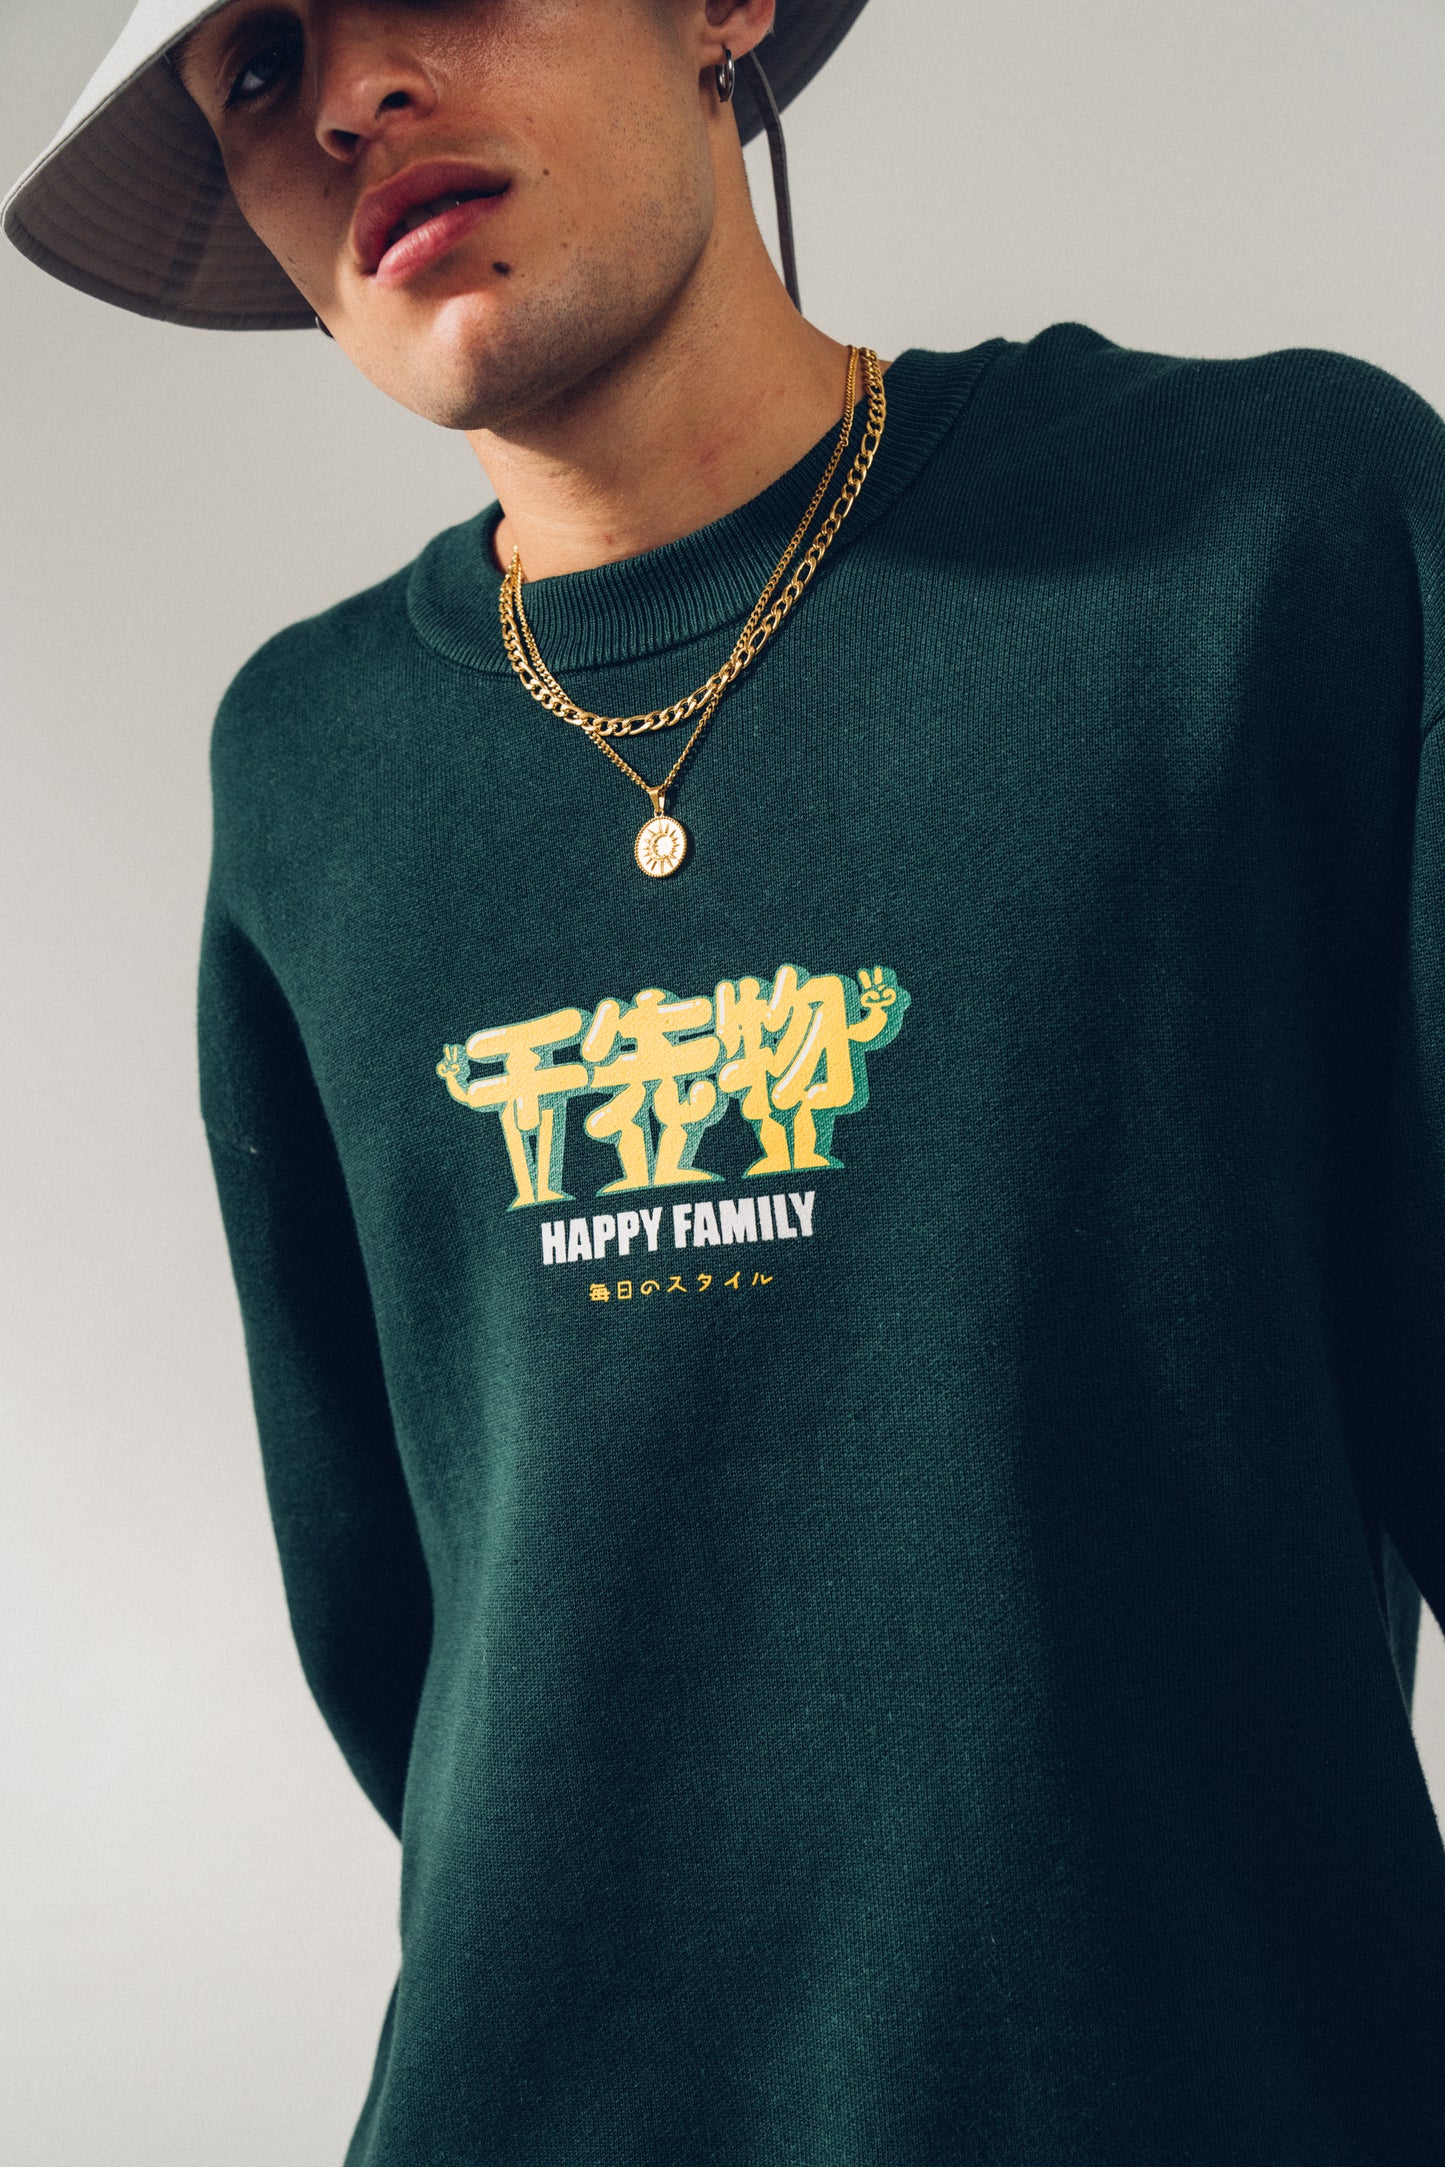 A Thousand Futures 'Happy Family' Knit Sweater - Forest Green